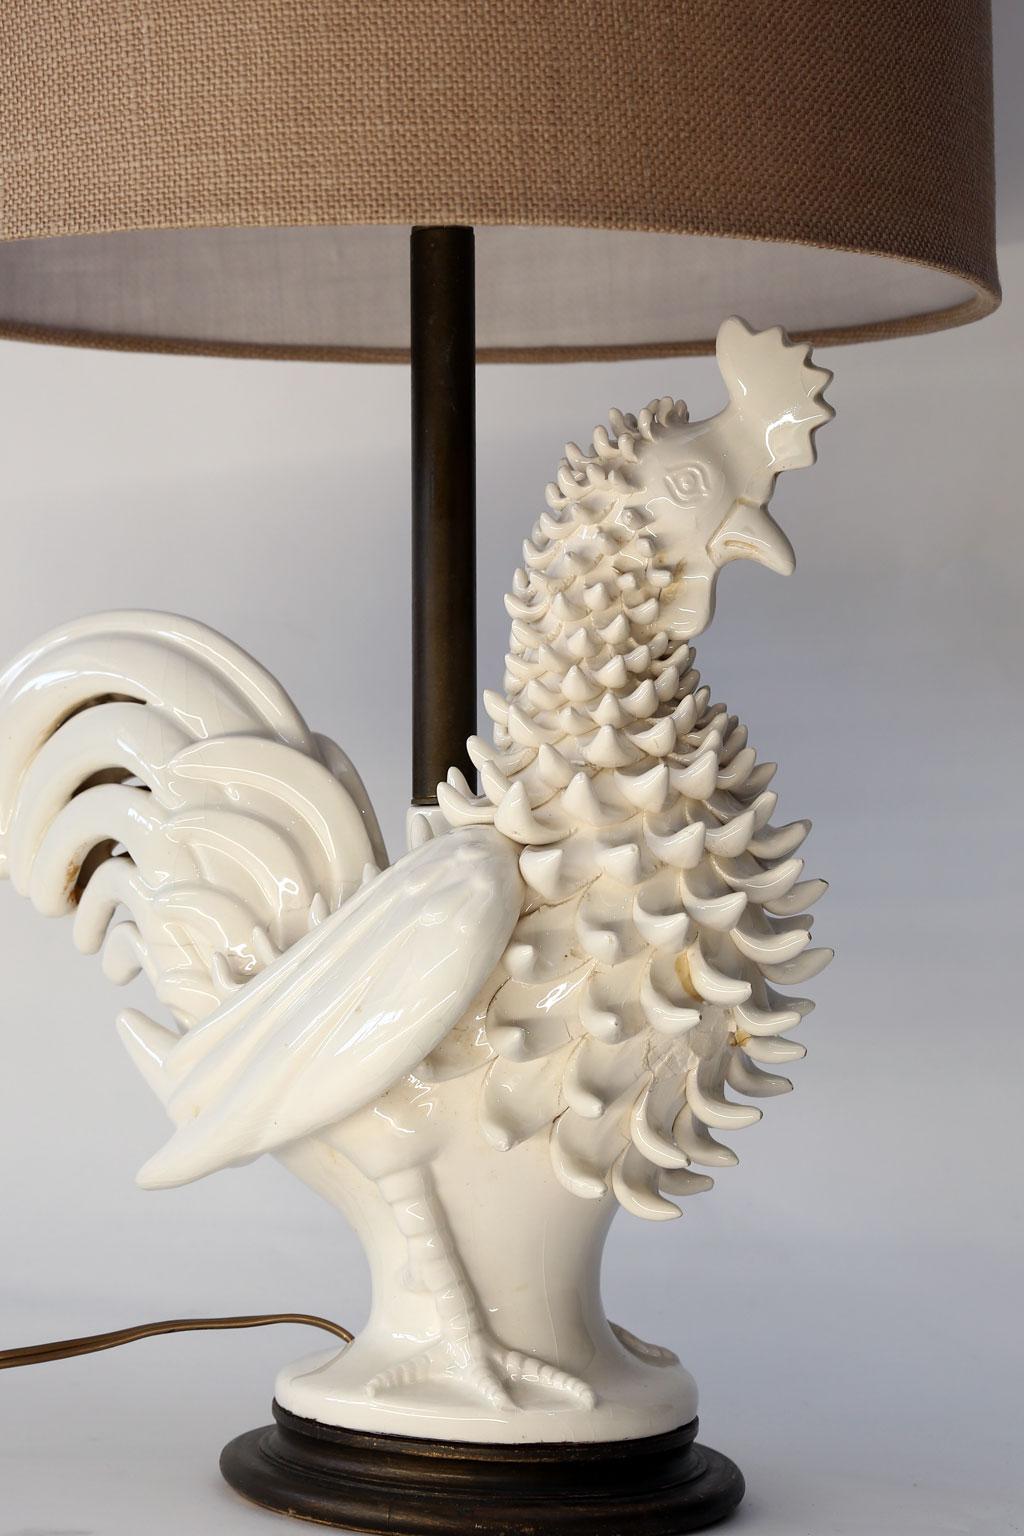 Italian ceramic rooster lamp, table lamp created from circa 1970s cream-color ceramic rooster, mounted on hand-painted turned wood base. Newly wired for use within the USA using all UL approved parts. Includes complementary rolled-edge burlap drum